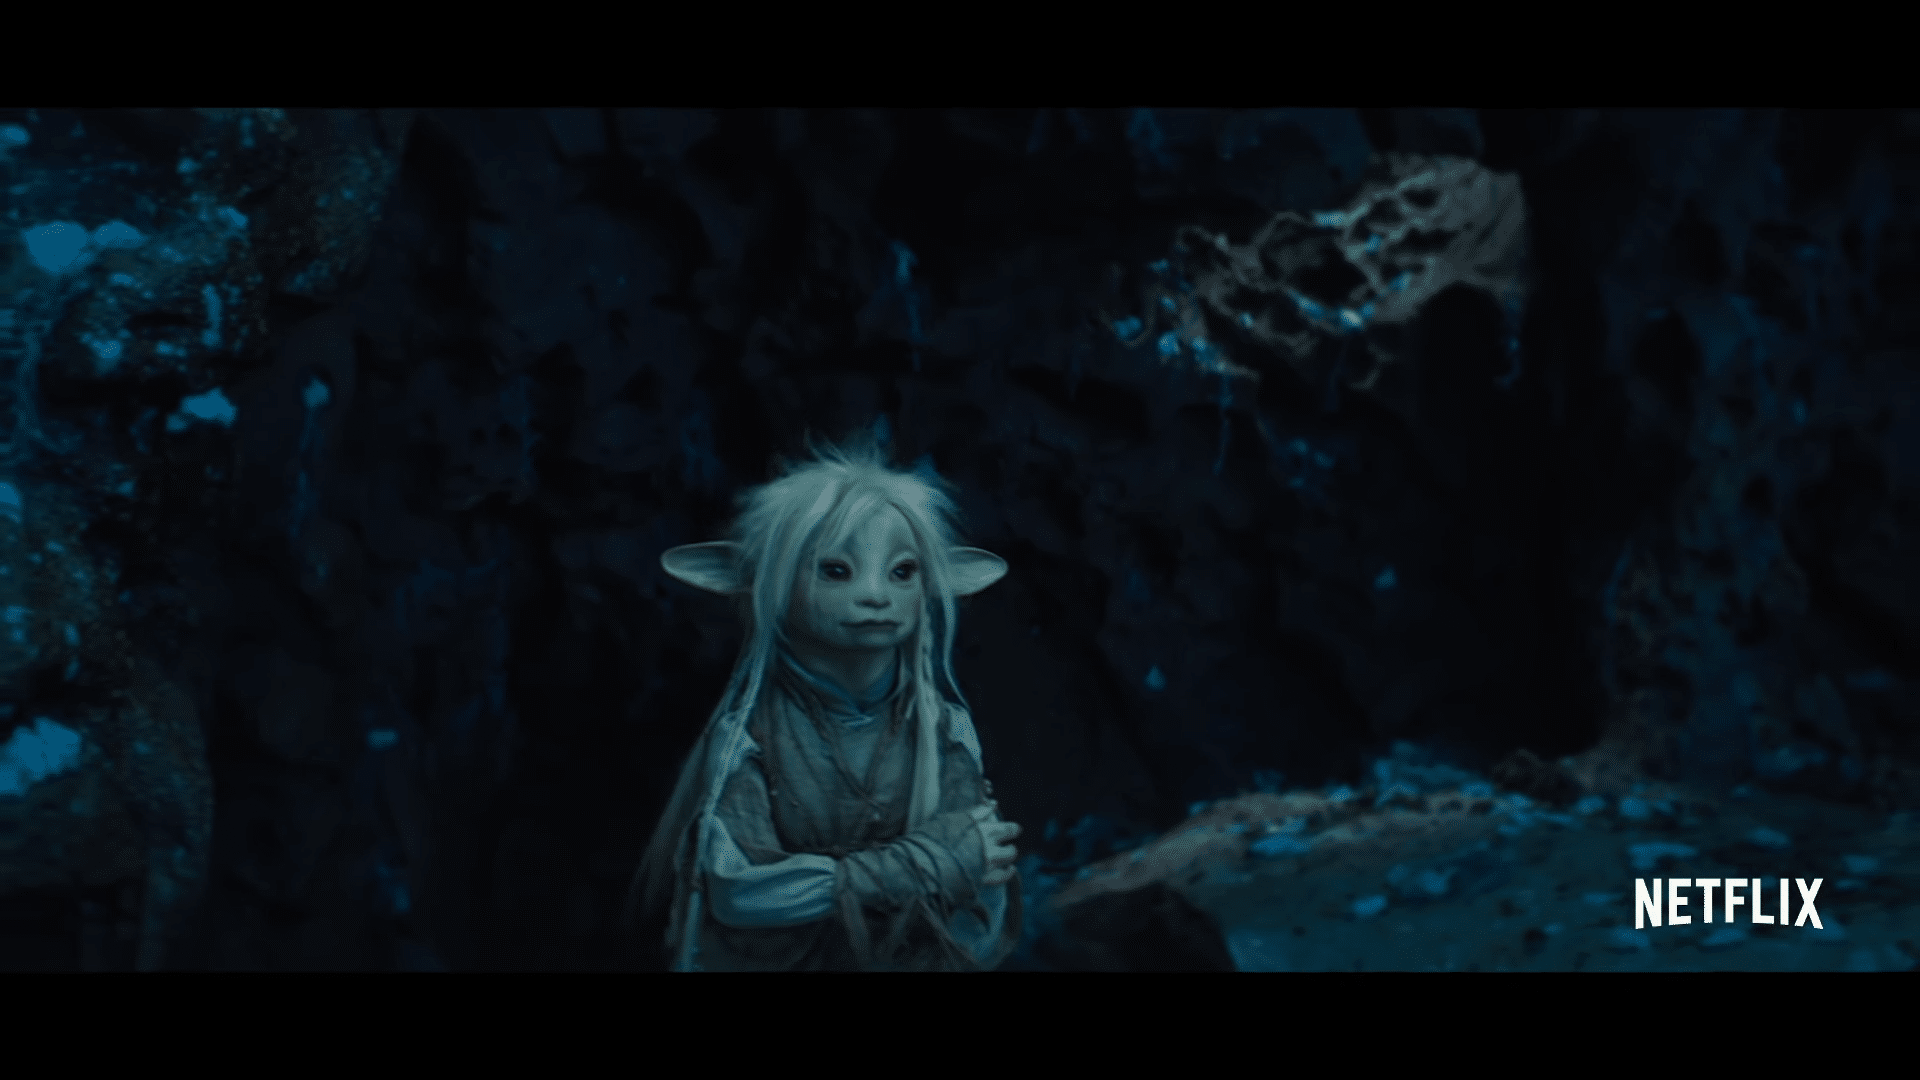 The Dark Crystal Age of Resistance Netflix Trailer, Netflix Sci Fi Shows, Netflix Adventure Shows, What's Coming to Netflix, New Netflix Shows